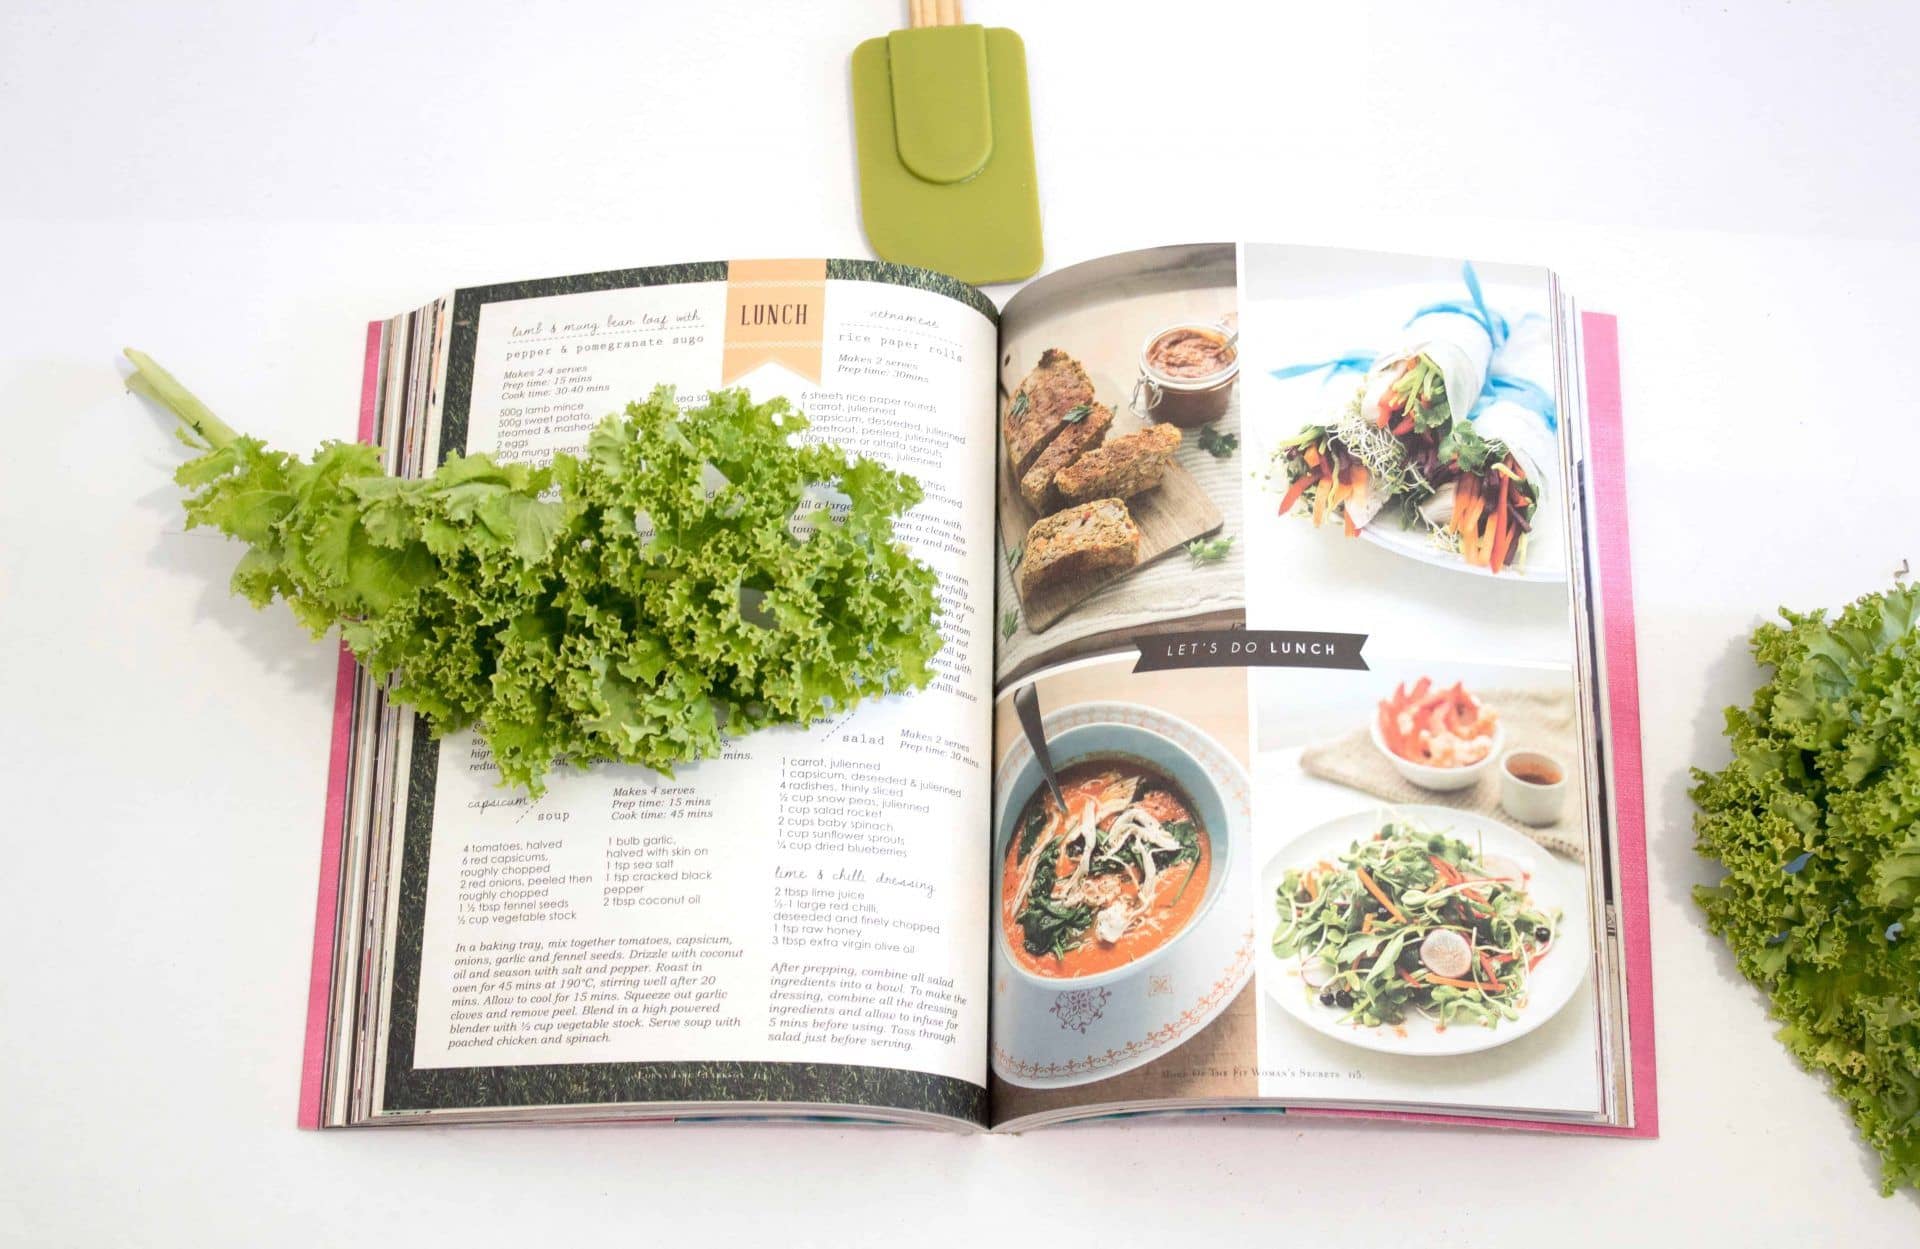 Open vegan cookbook with kale leaves and spatula next to book